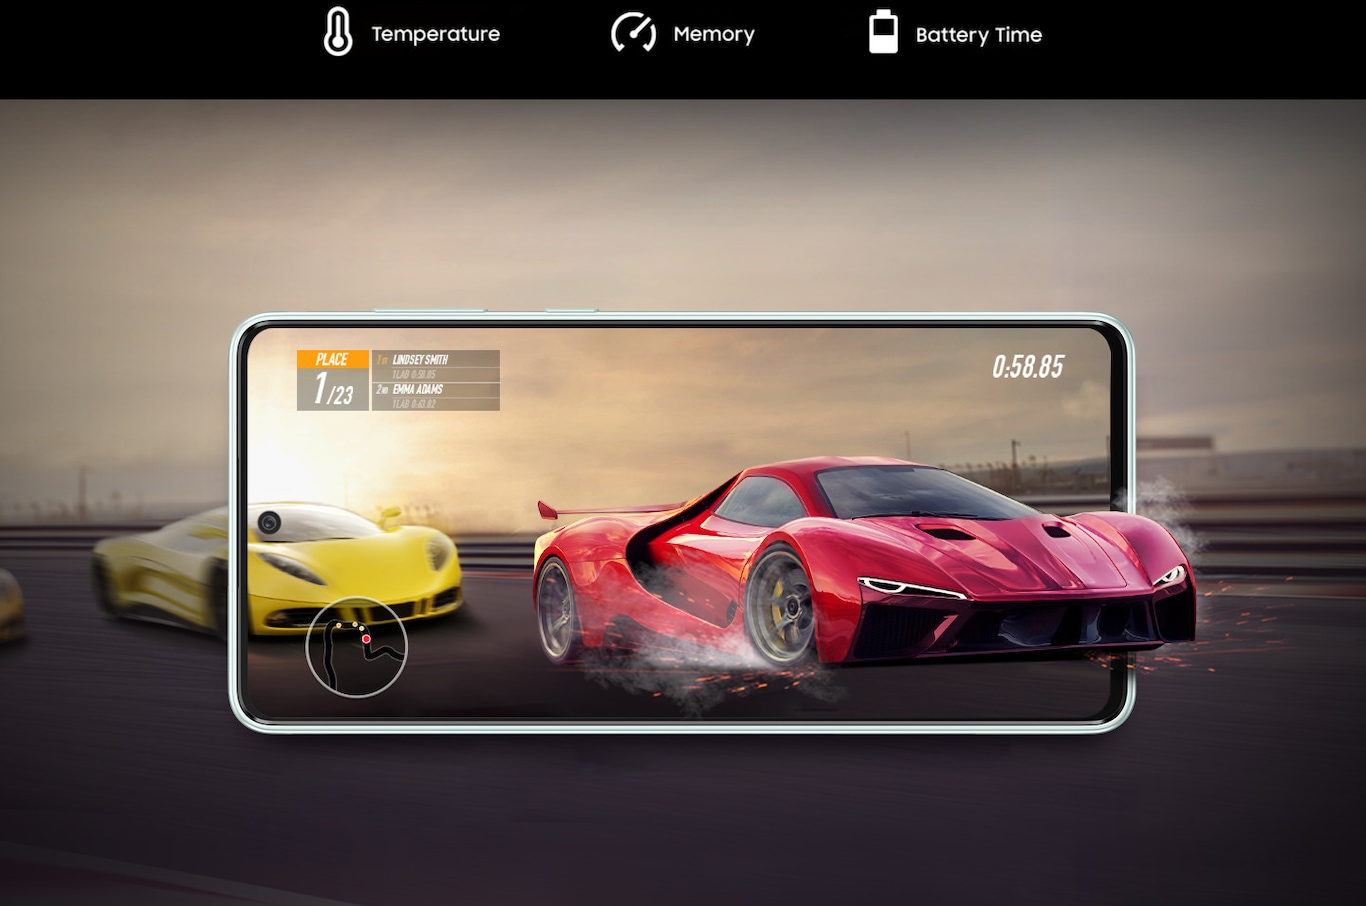 Galaxy A73 5G device in landscape mode, The background is a scene from a car racing game, showing a racetrack with a yellow car racing. On the screen is a racing red car, driving out of the boundaries of the screen. Above, text reads Temperature, Memory and Battery Time.